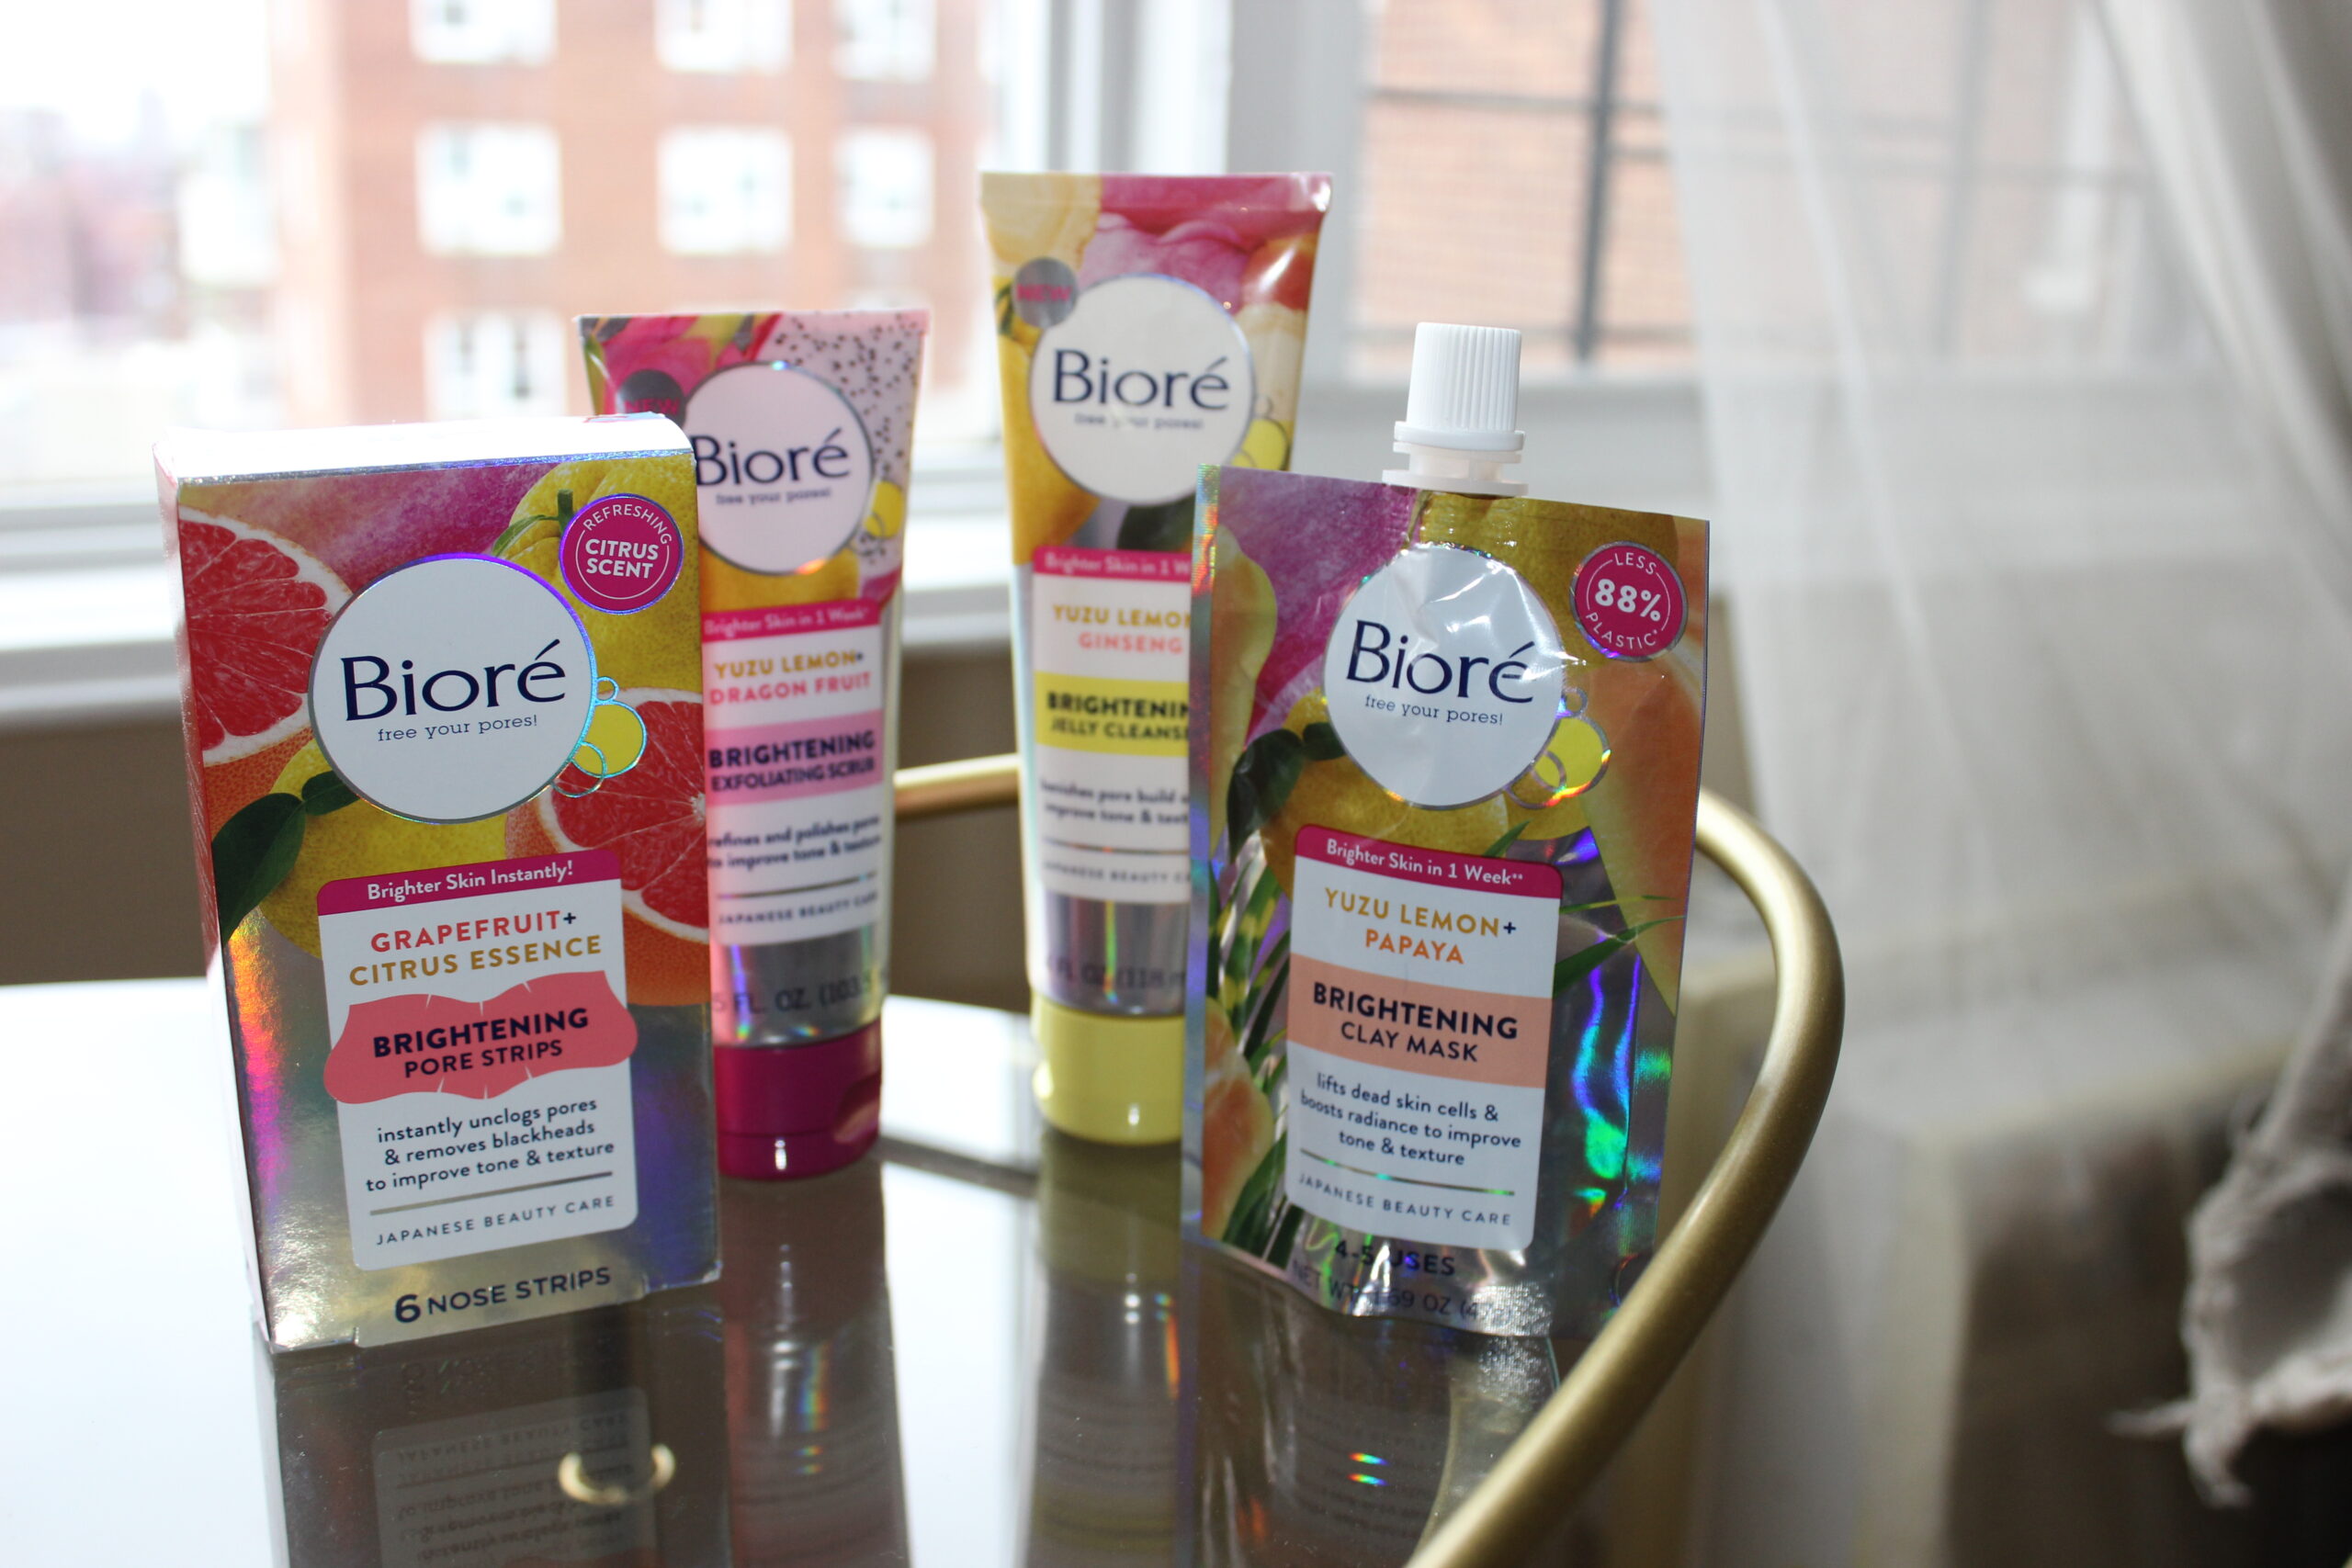 The Bioré Brightening collection